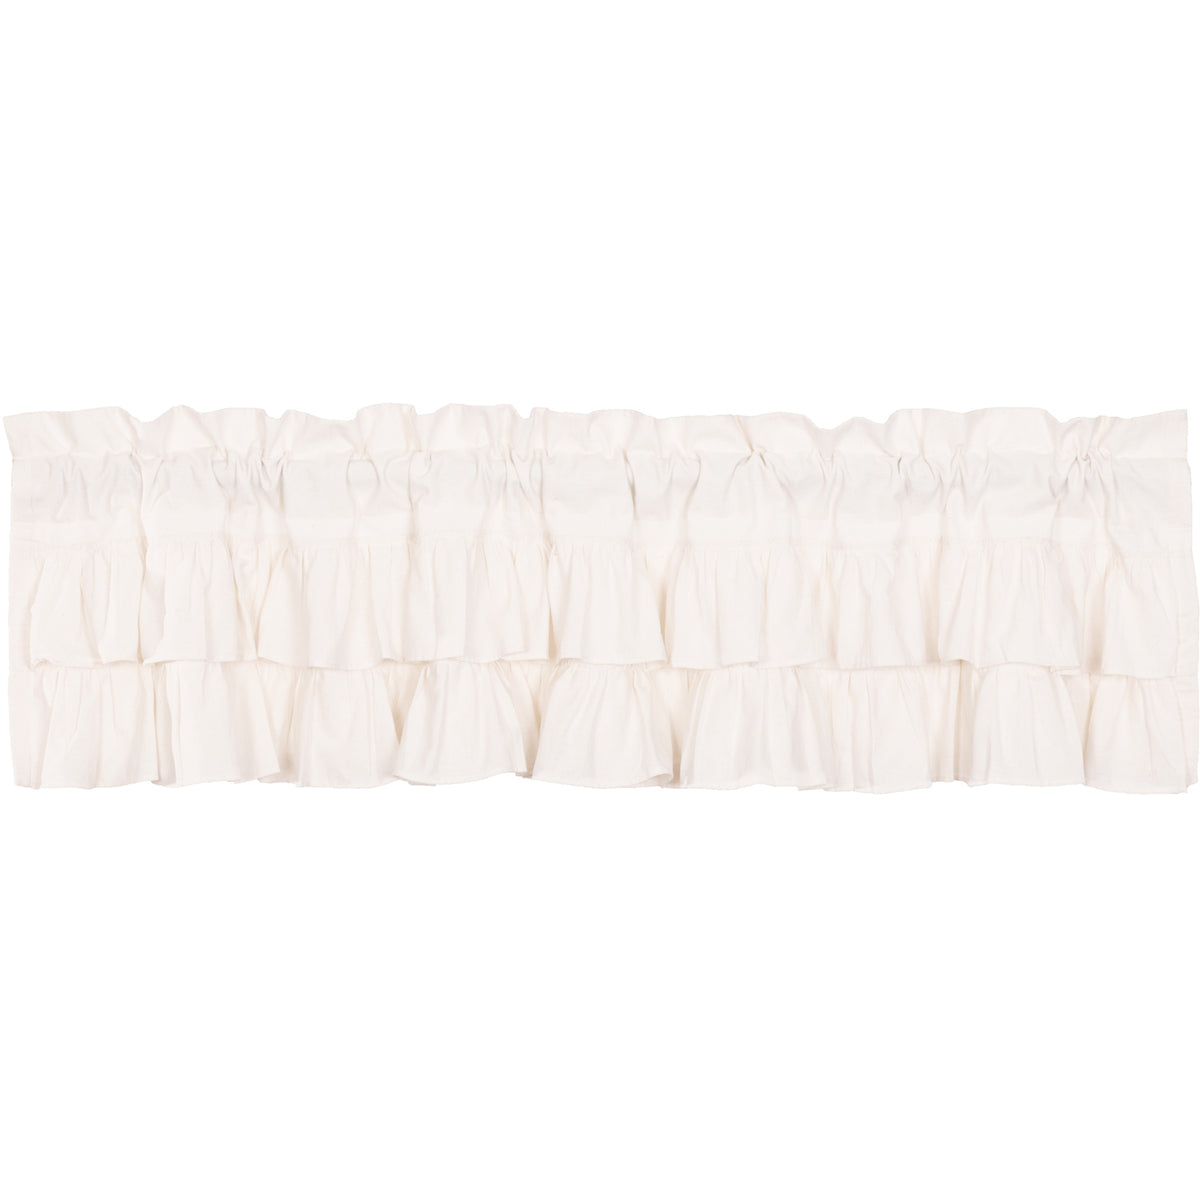 Simple Life Flax Antique White Ruffled Valance 16x72